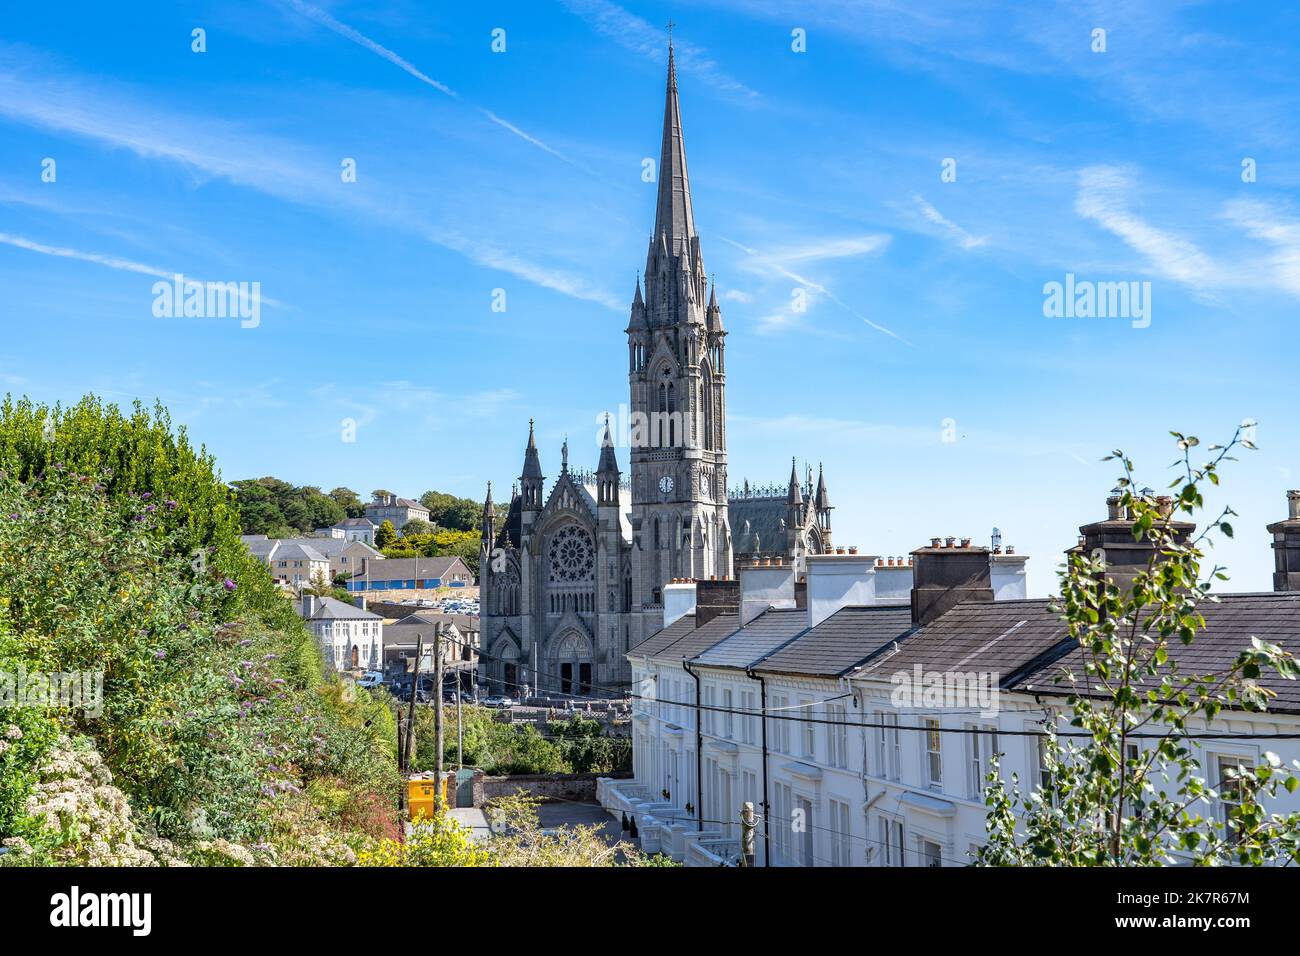 St. Colman's Cathedral in Cobh, Ireland has granite spire and is designed in French Gothic style Stock Photo